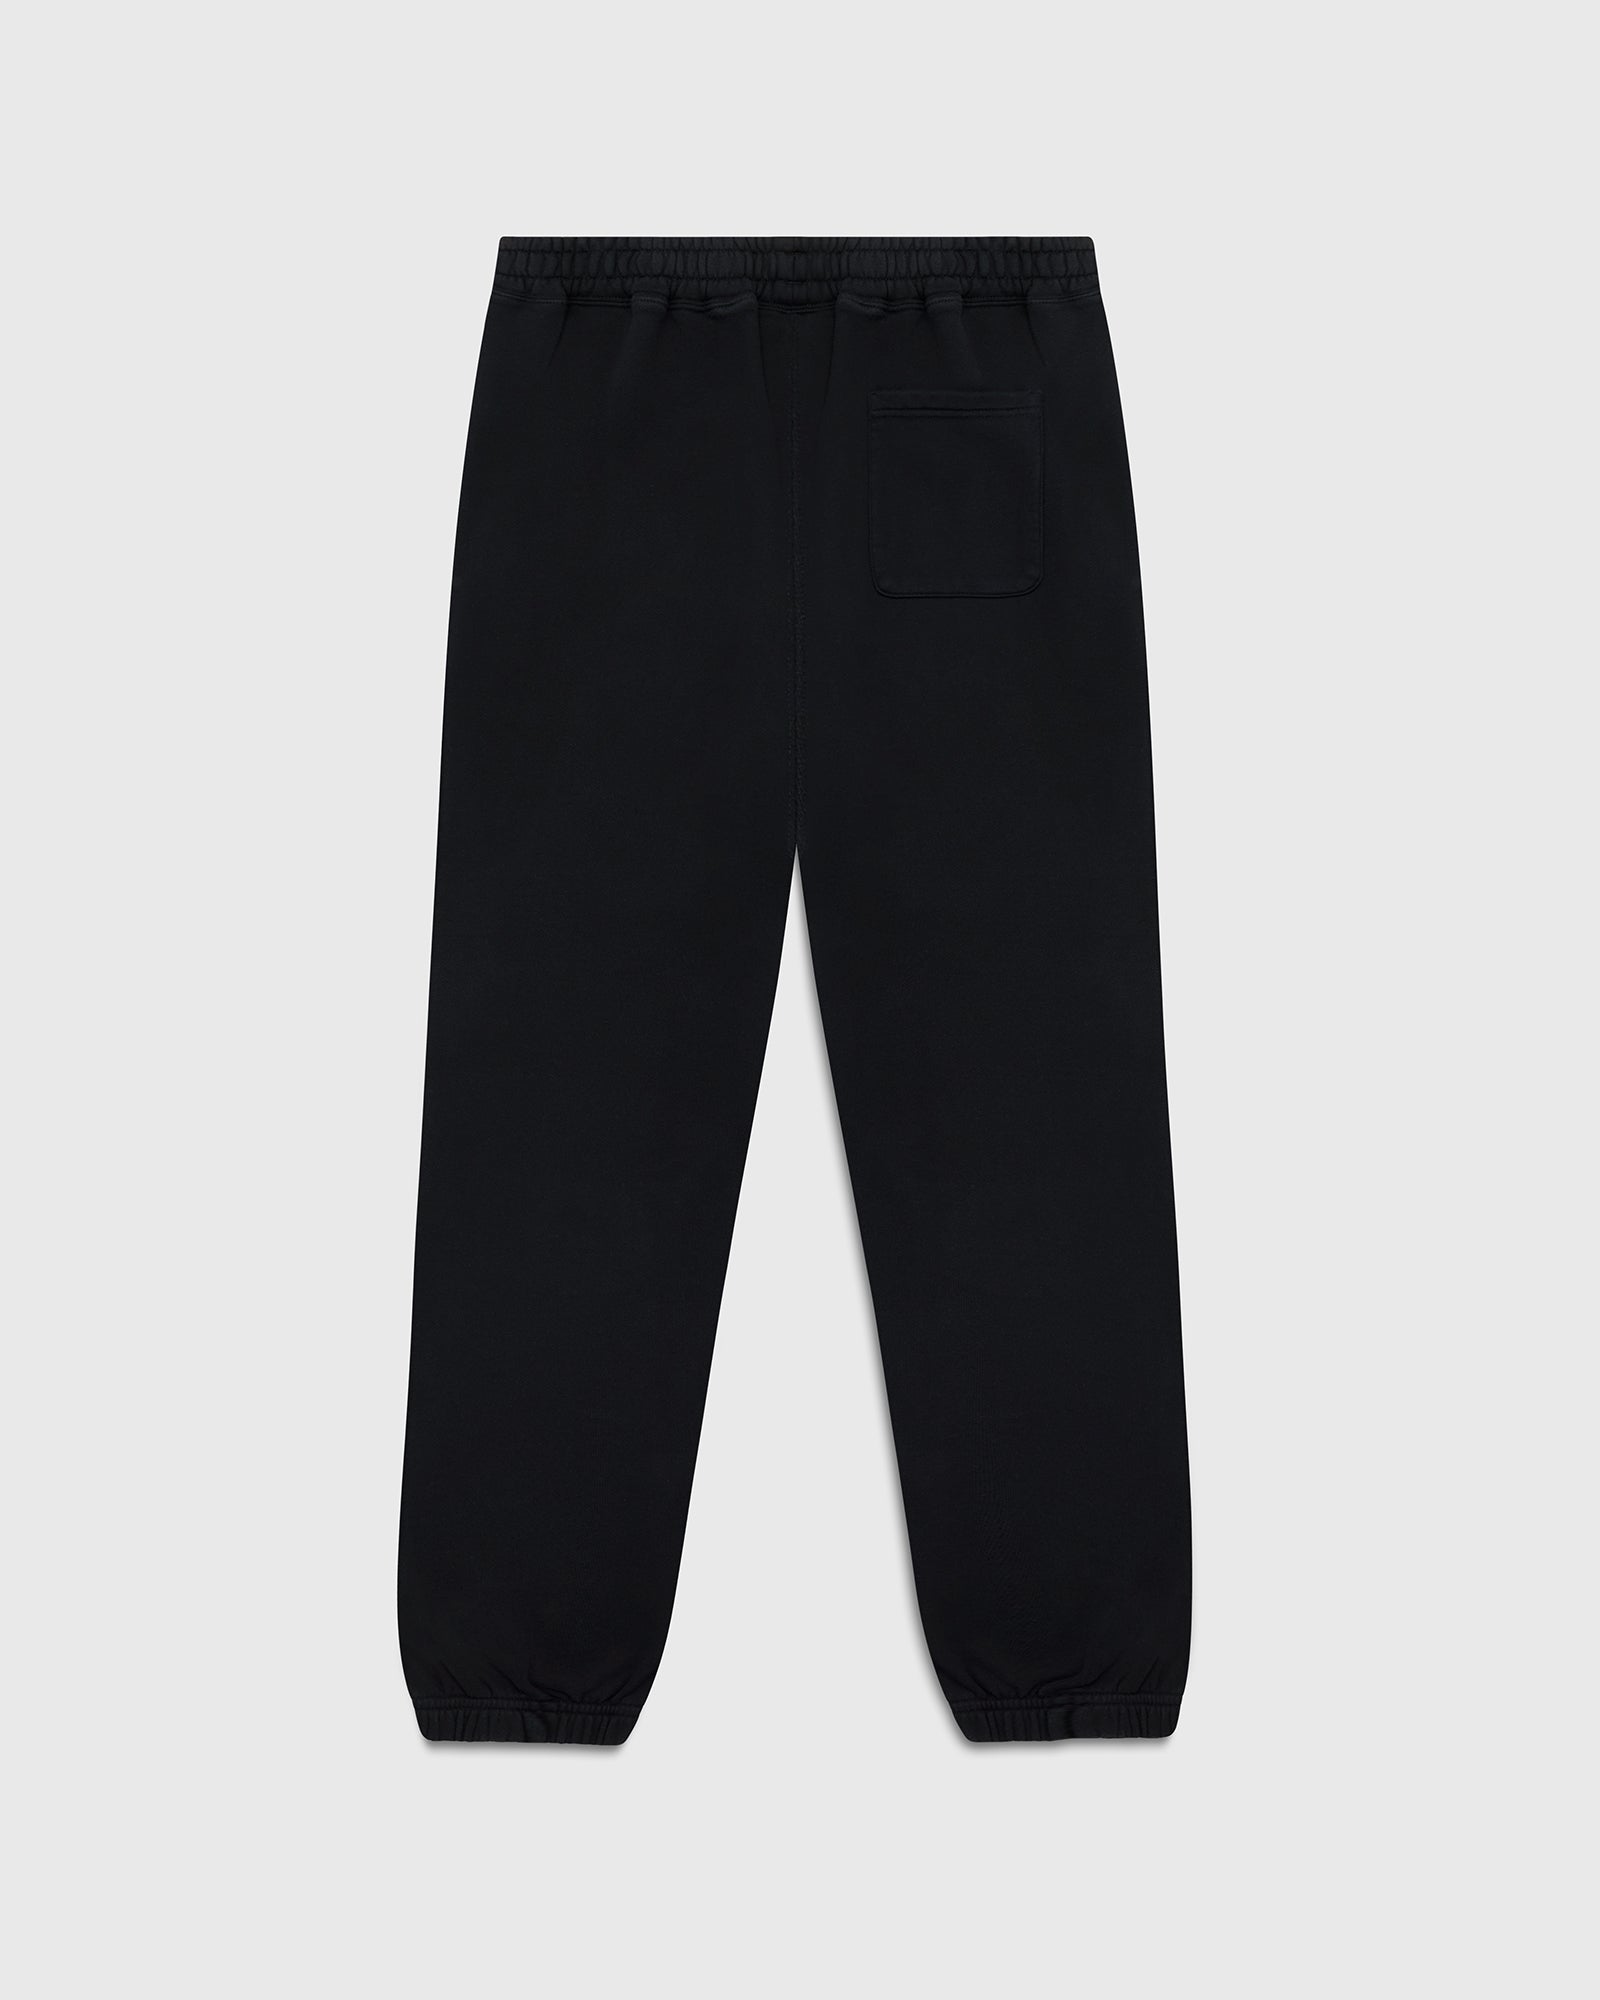 Classic Relaxed Fit Sweatpant - Black - October's Very Own